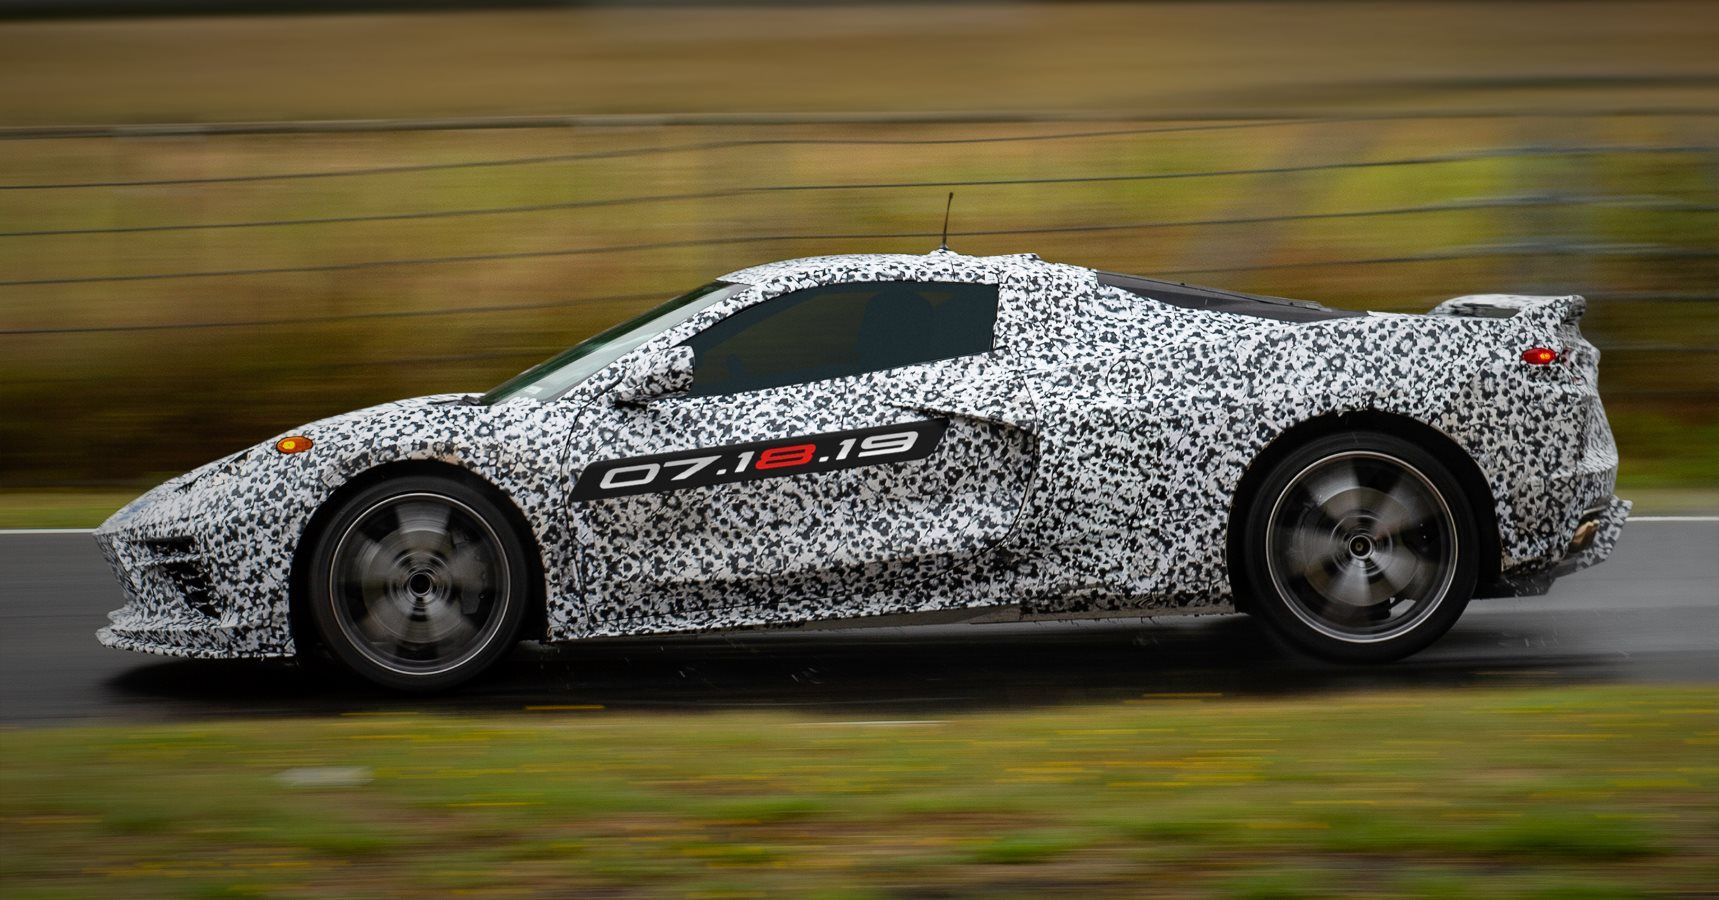 Mid-Engine Corvette Uses Advanced ECU Encryption To Thwart Both Thieves And Tuners